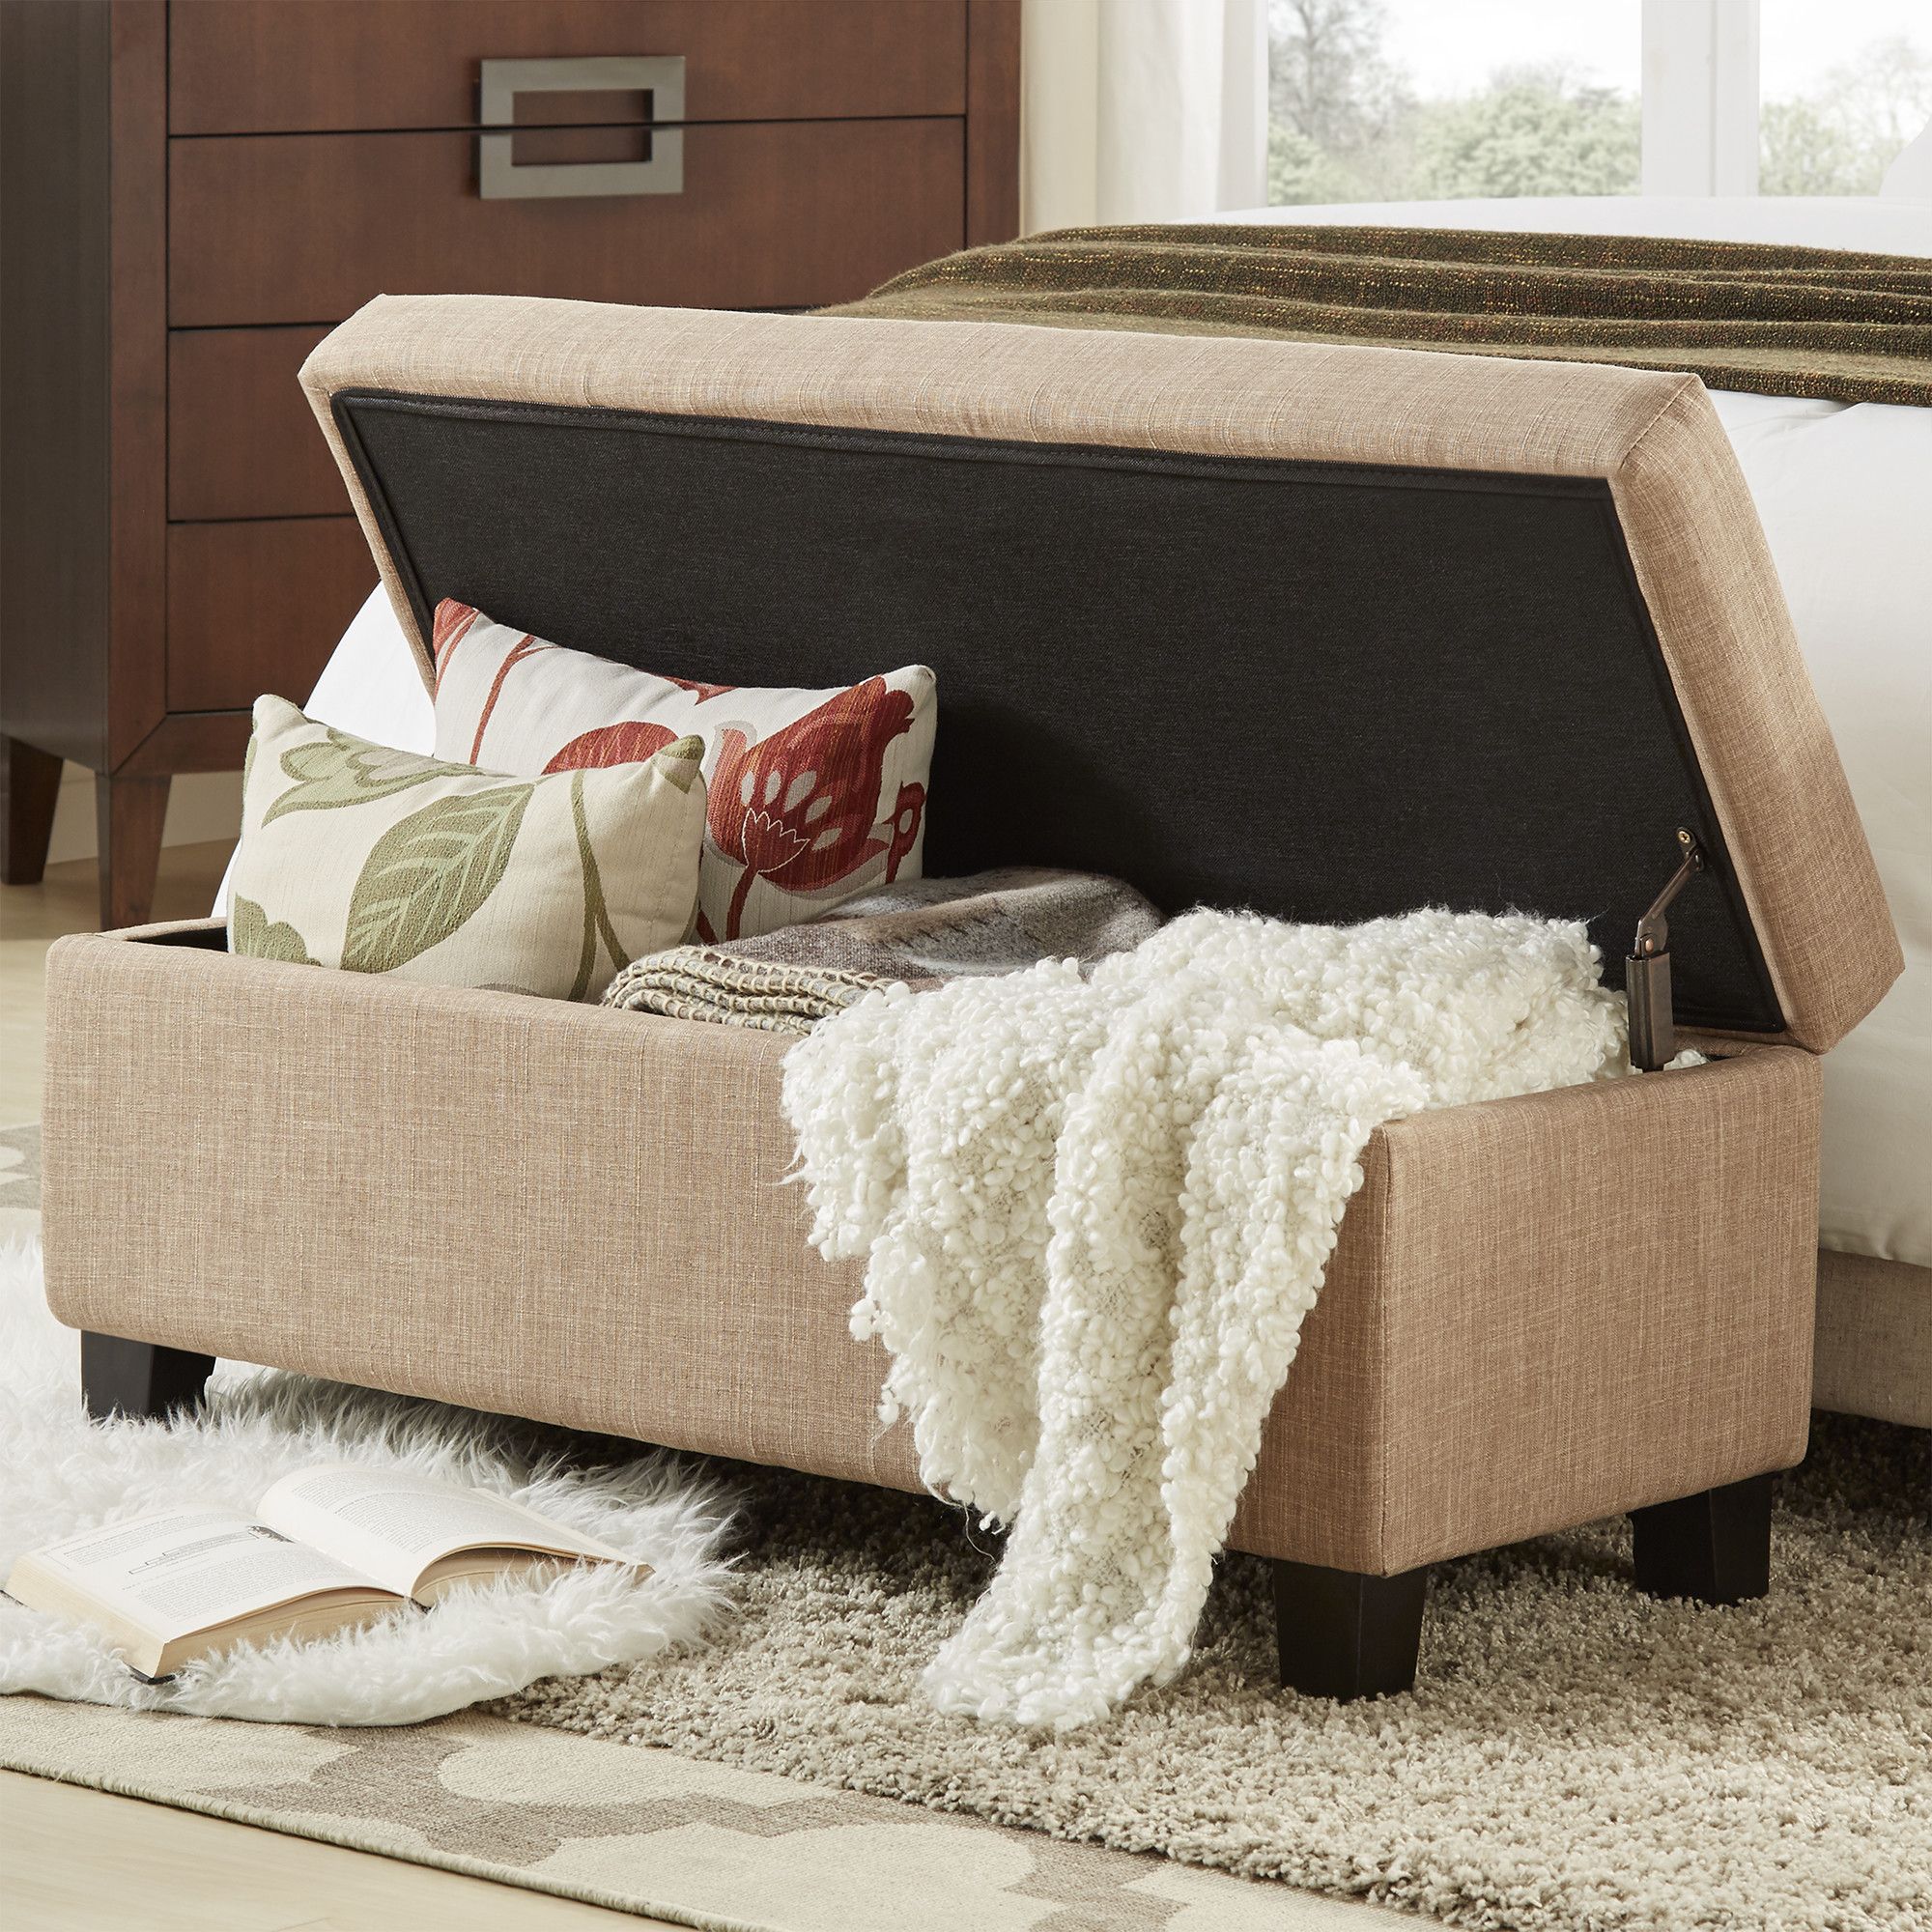 Discover The Advantages Of Having A Bedroom Storage Bench